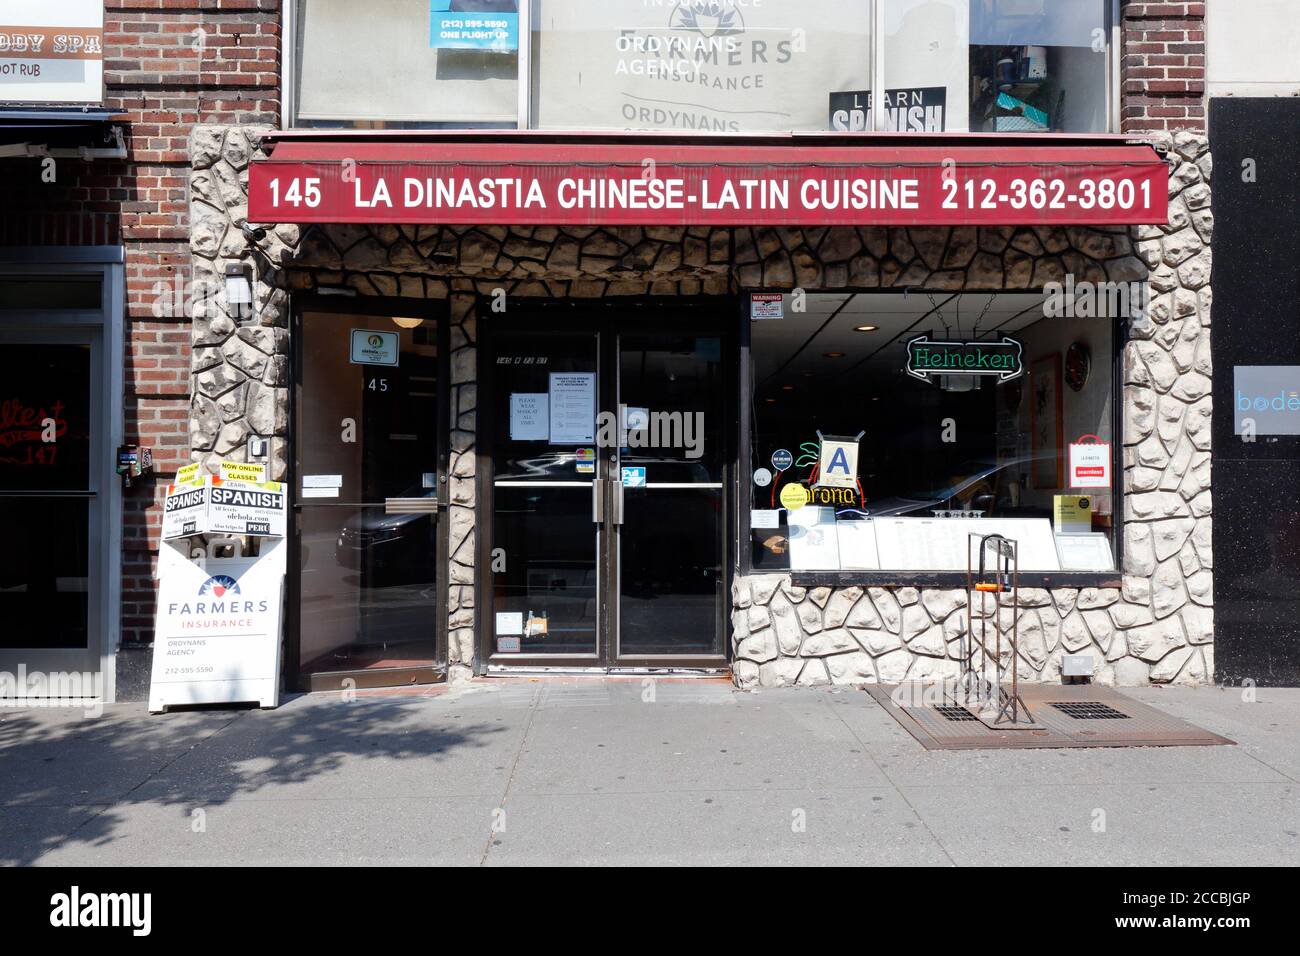 La Dinastia, 145 W 72nd St, New York, NYC storefront photo of a Chinese Cuban restaurant in Manhattan's Upper West Side neighborhood. Stock Photo